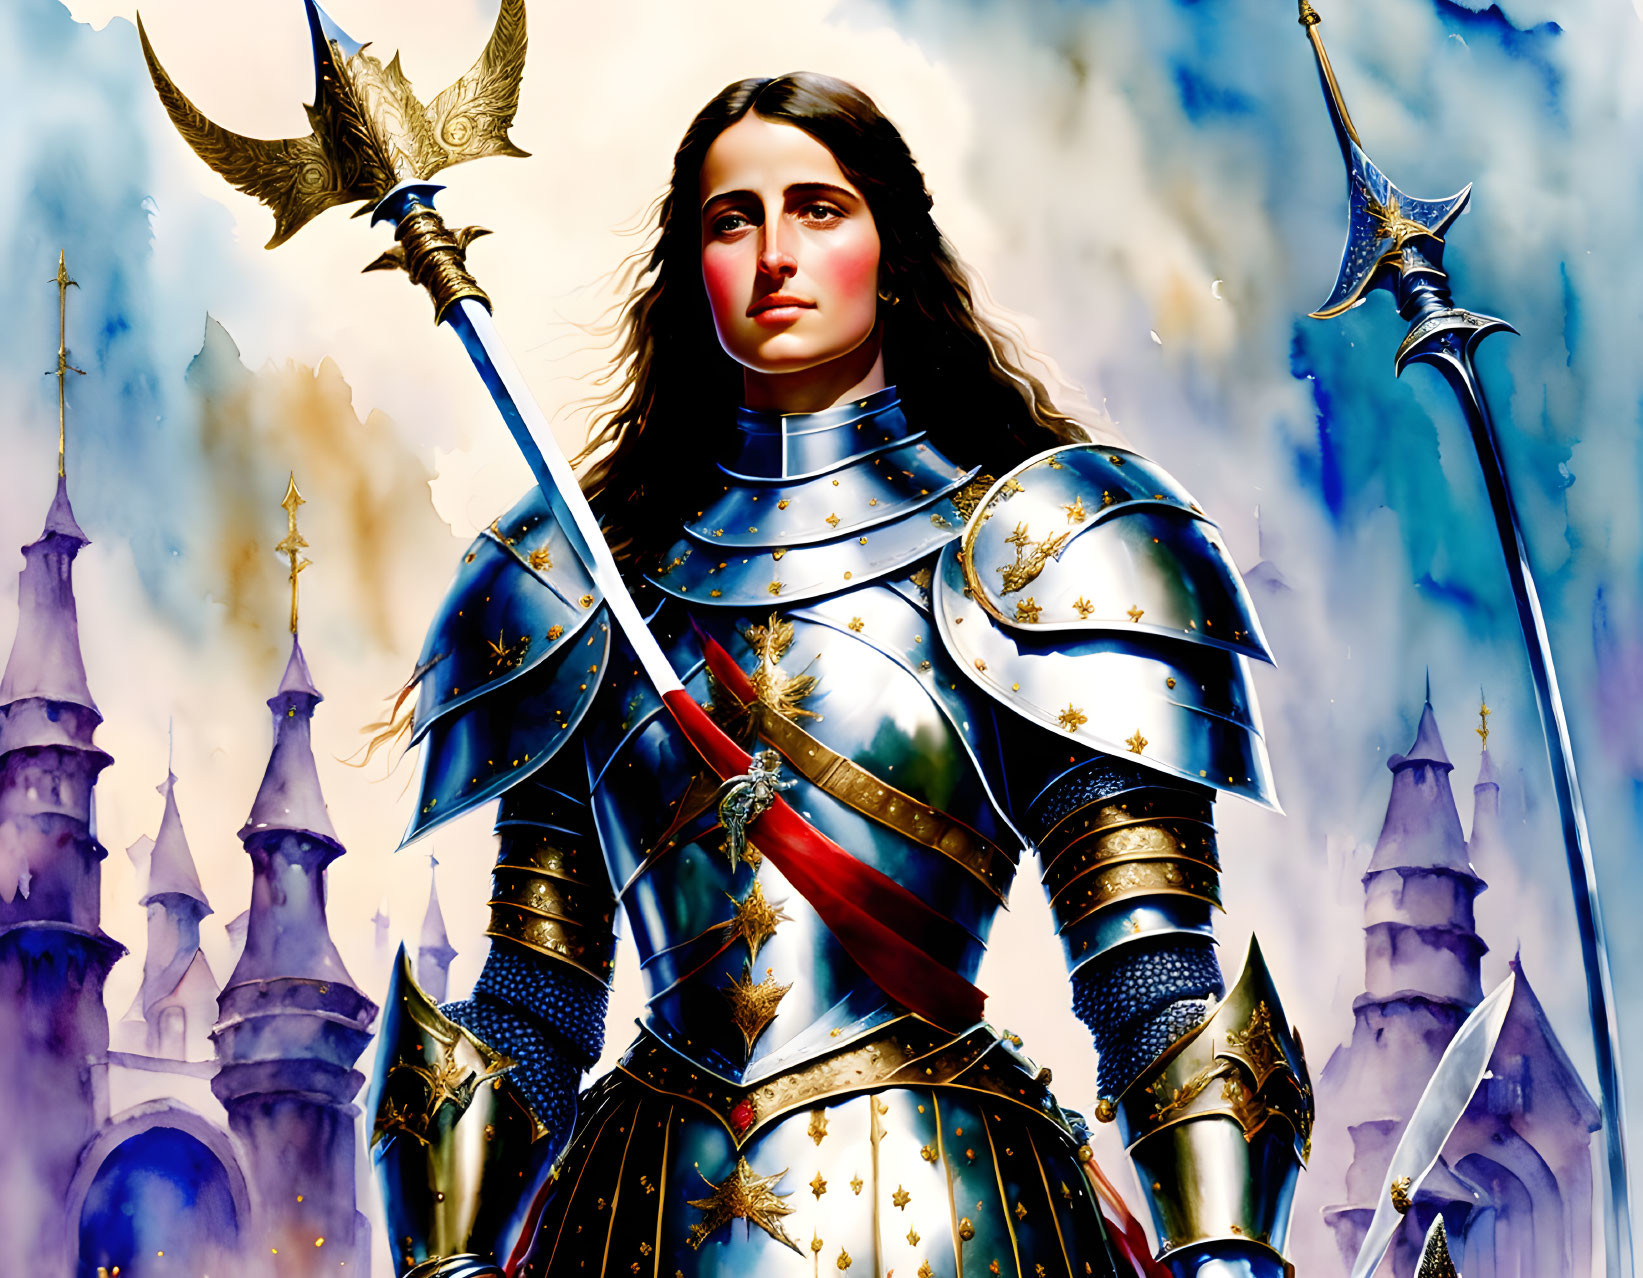 Digital artwork: Woman in medieval armor with castle and clouds